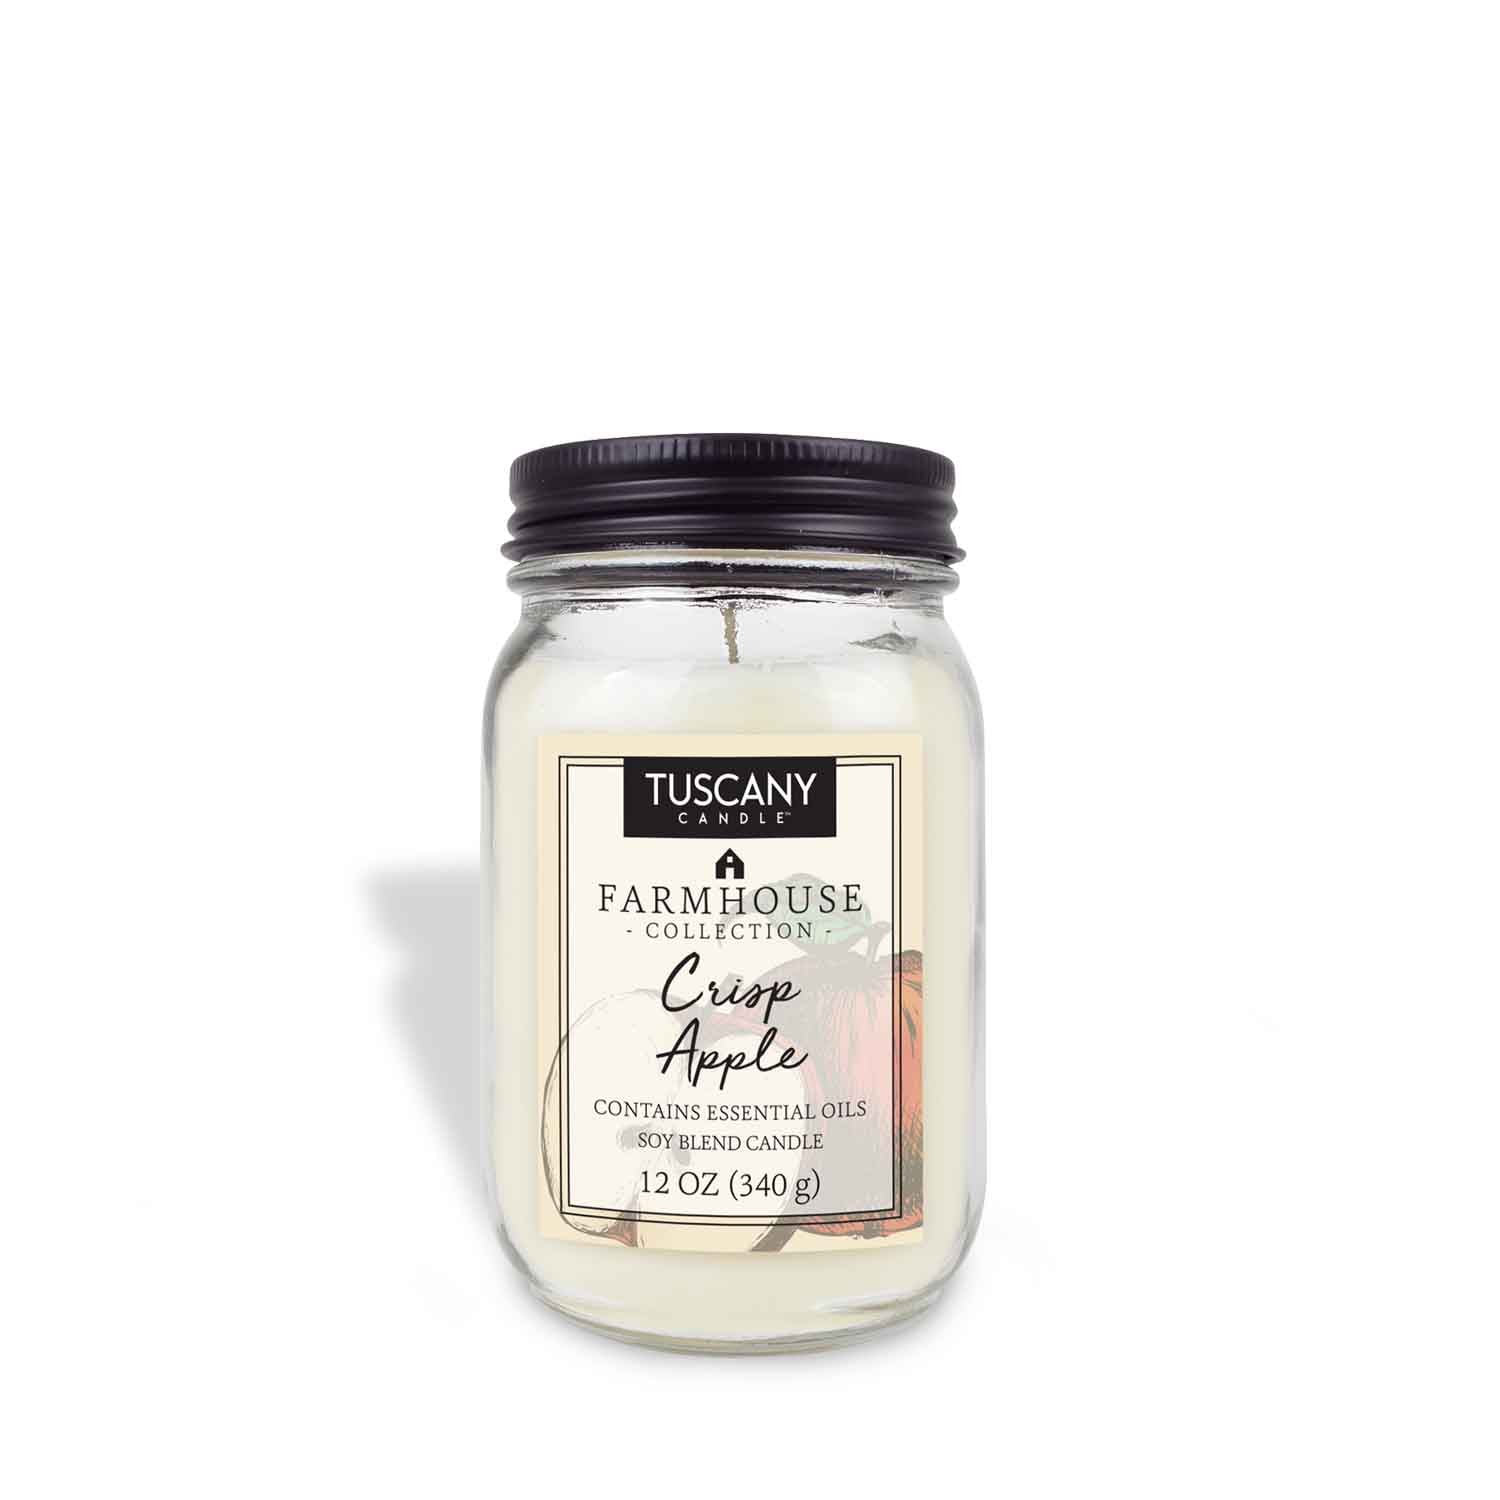 A Crisp Apple Scented Jar Candle (12 oz) from Tuscany Candle® EVD in a rustic mason jar on a white background.